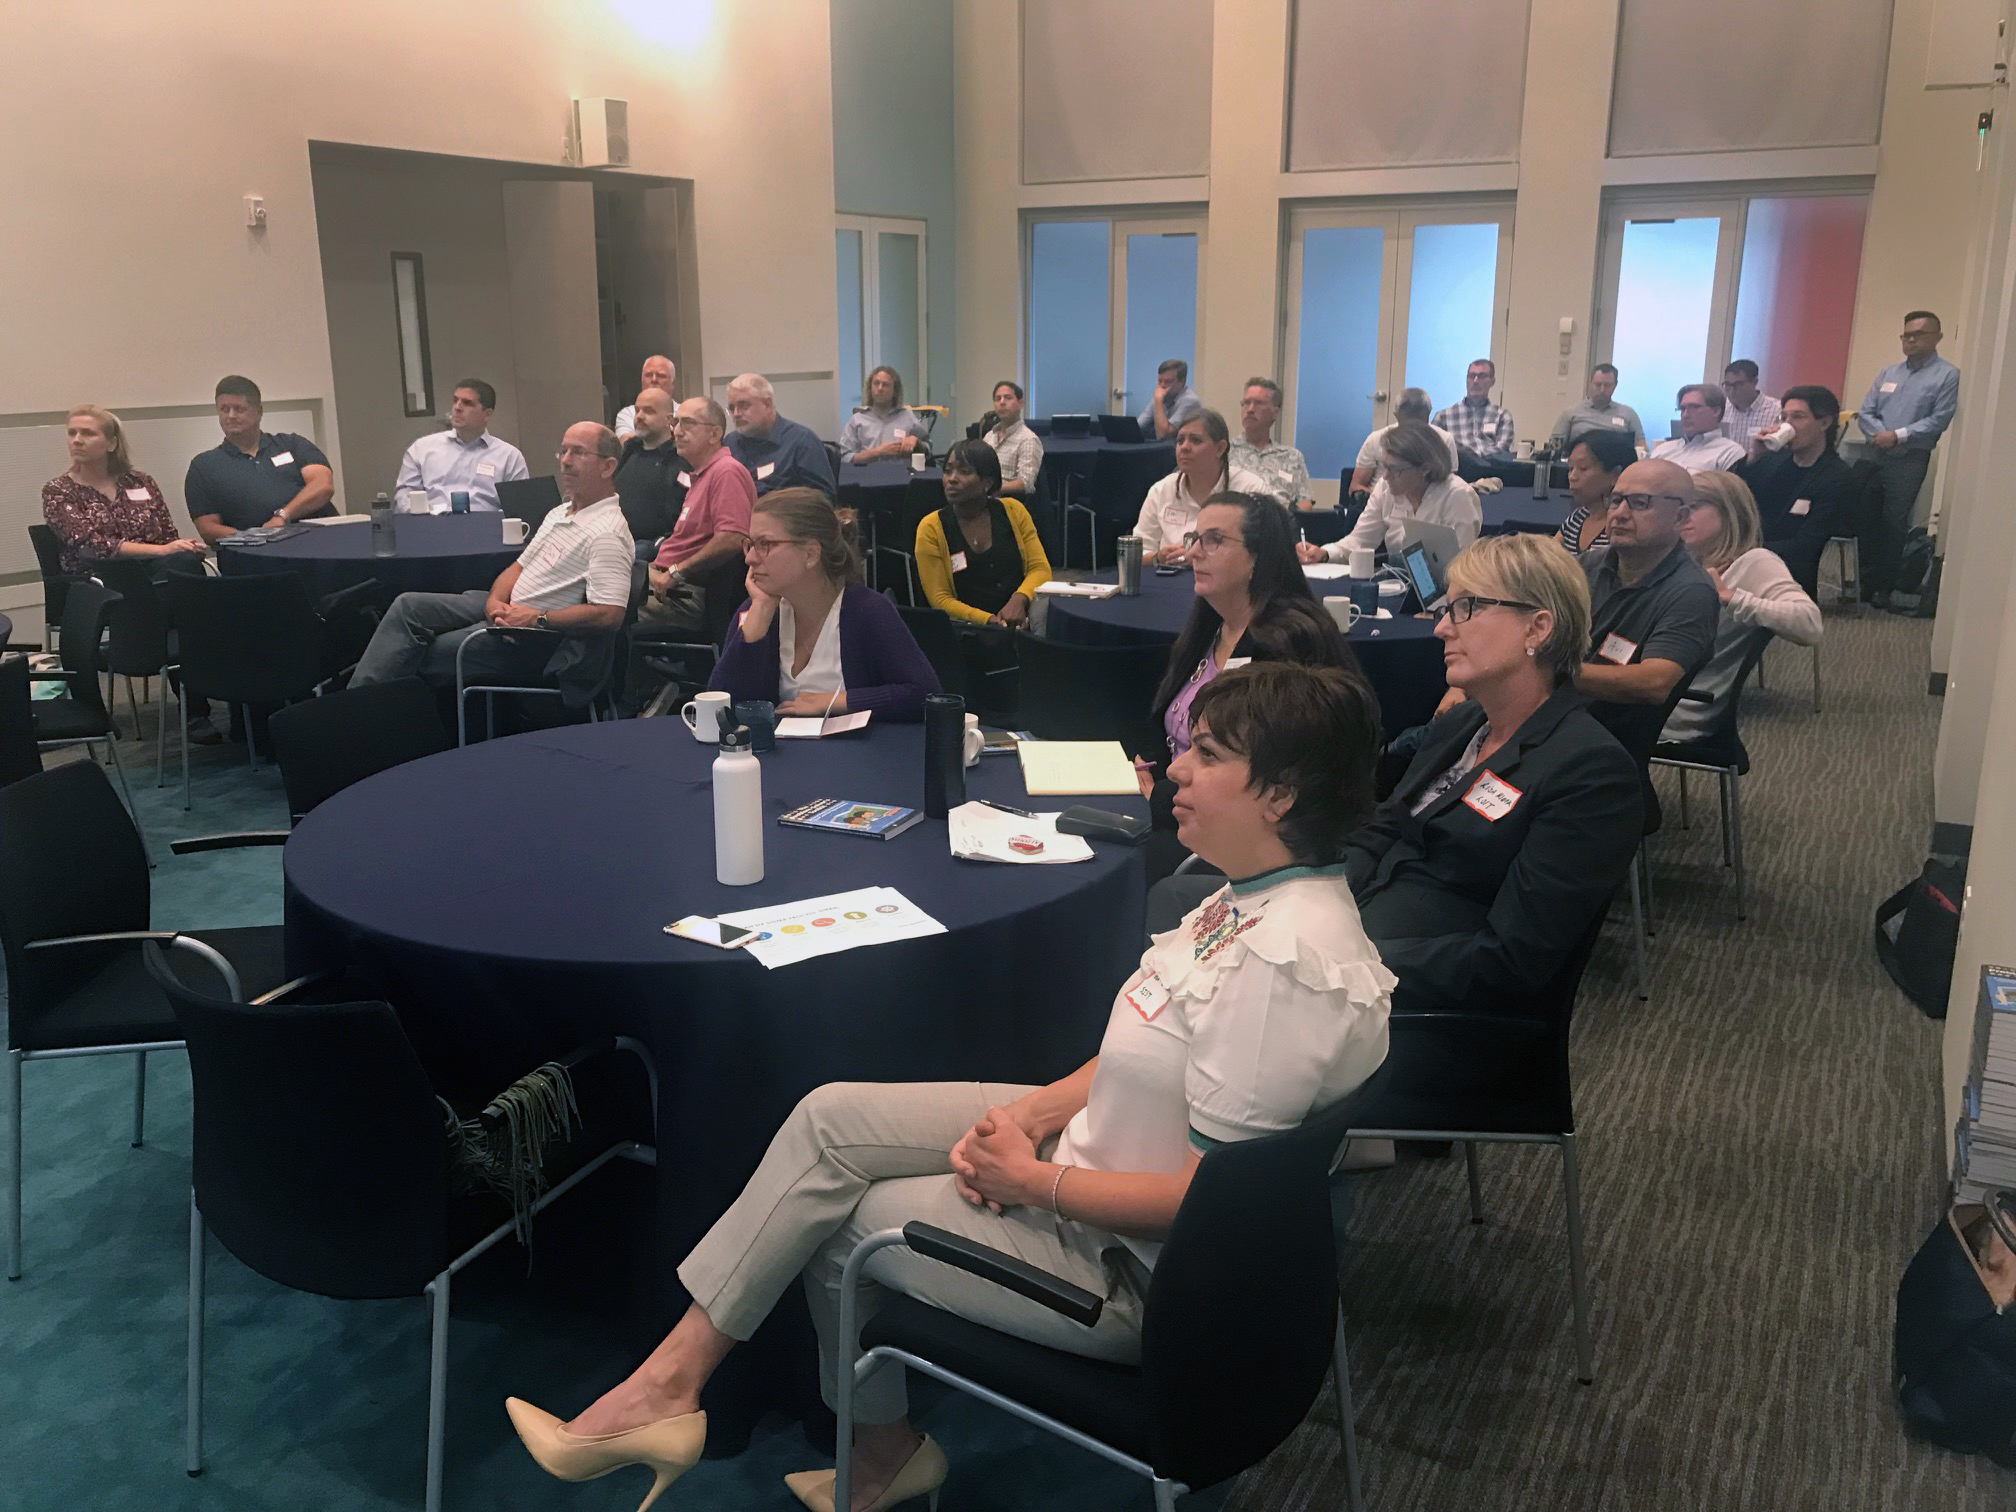 IT Foundations attendees August 28, 2019